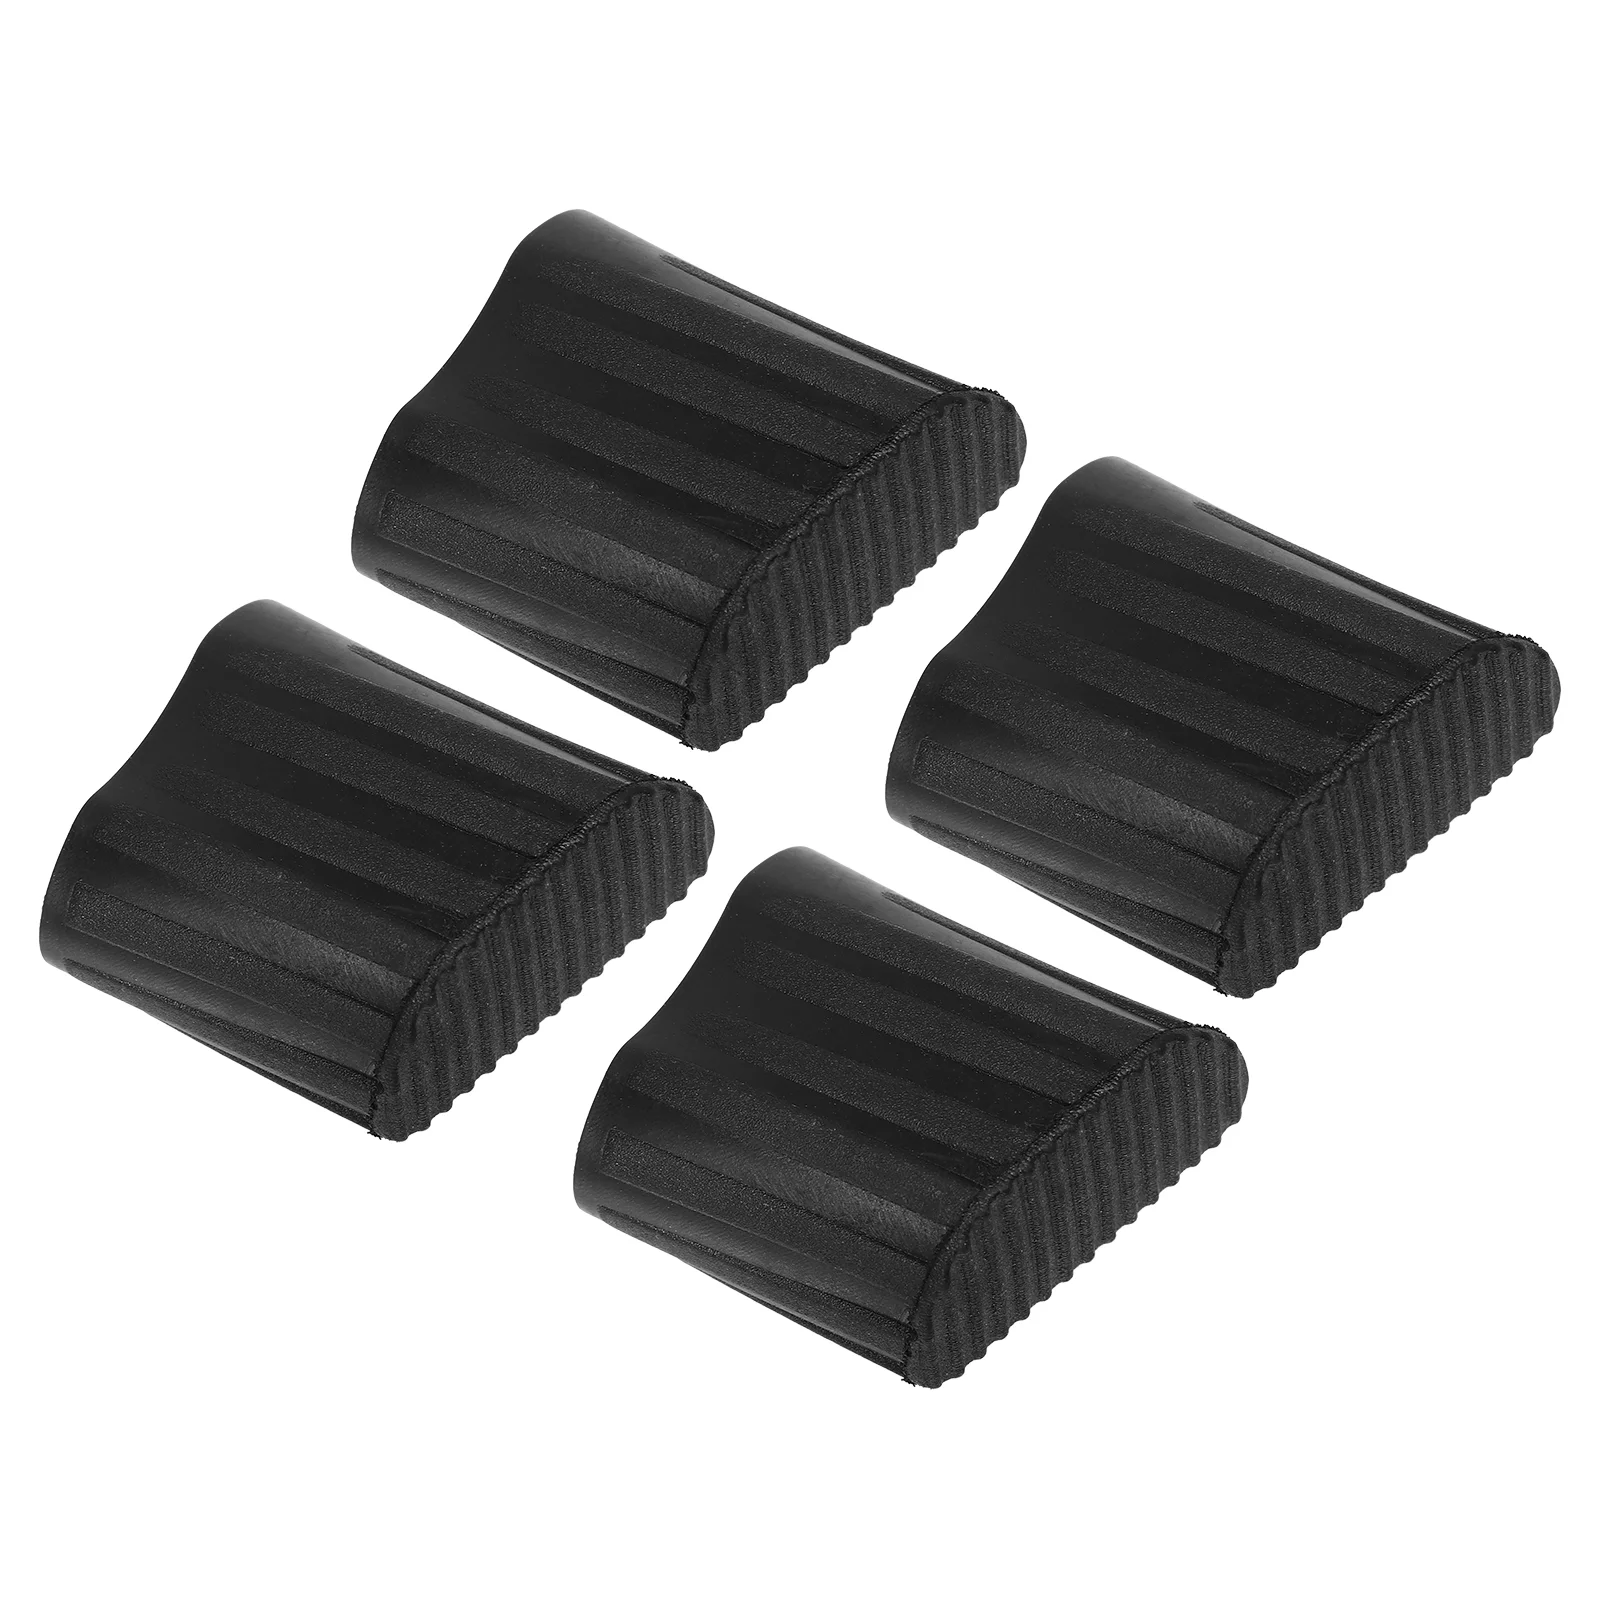 

2/4Pcs Step Ladder Feet Covers Versatile Ladder Leg Covers Non-Skid Ladder Pads Rubber Foot Pad Insulating Foot Sleeve